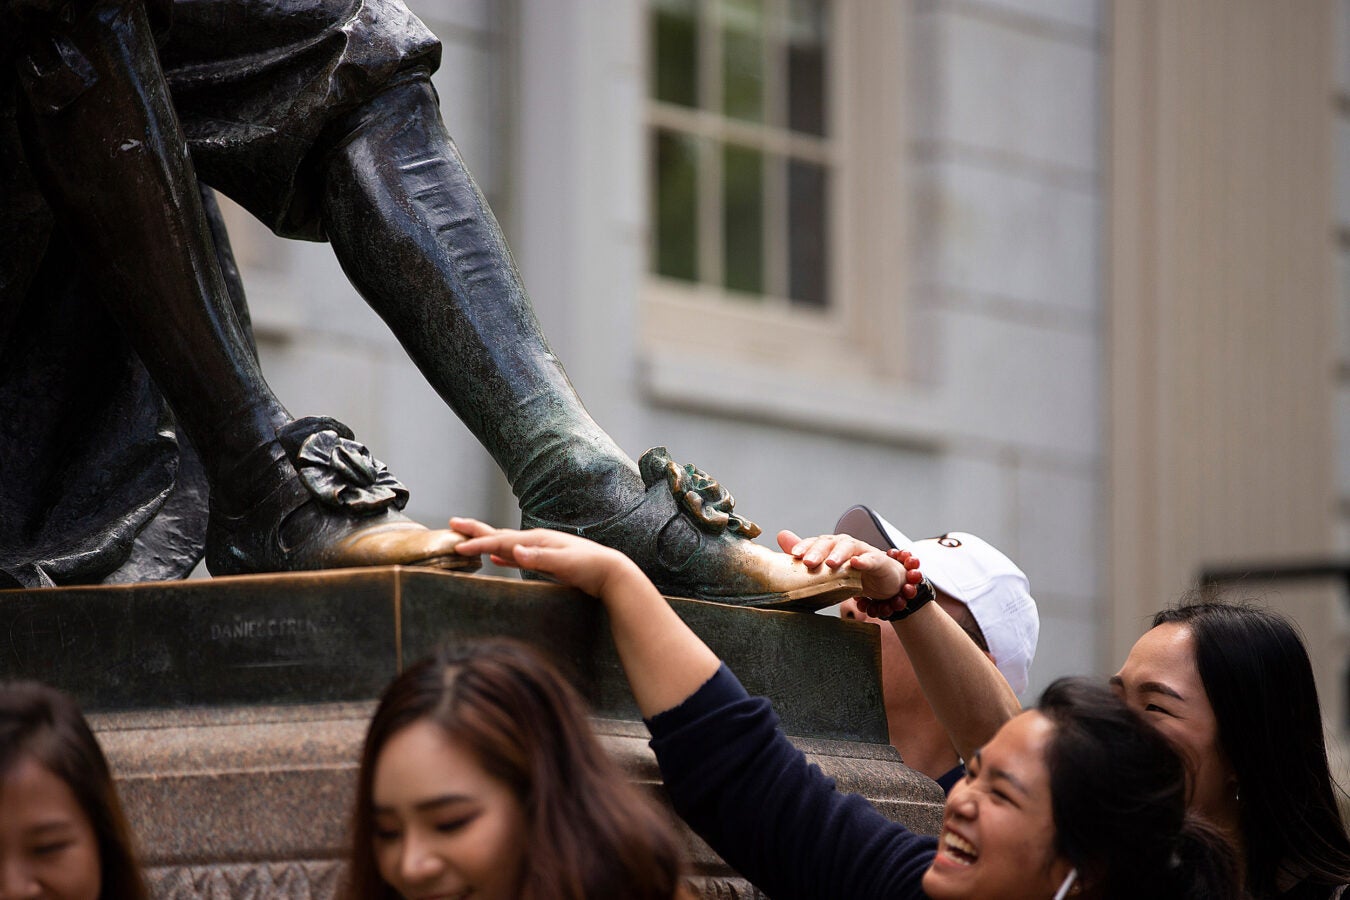 Tourists laugh, touch the feet of the statue.